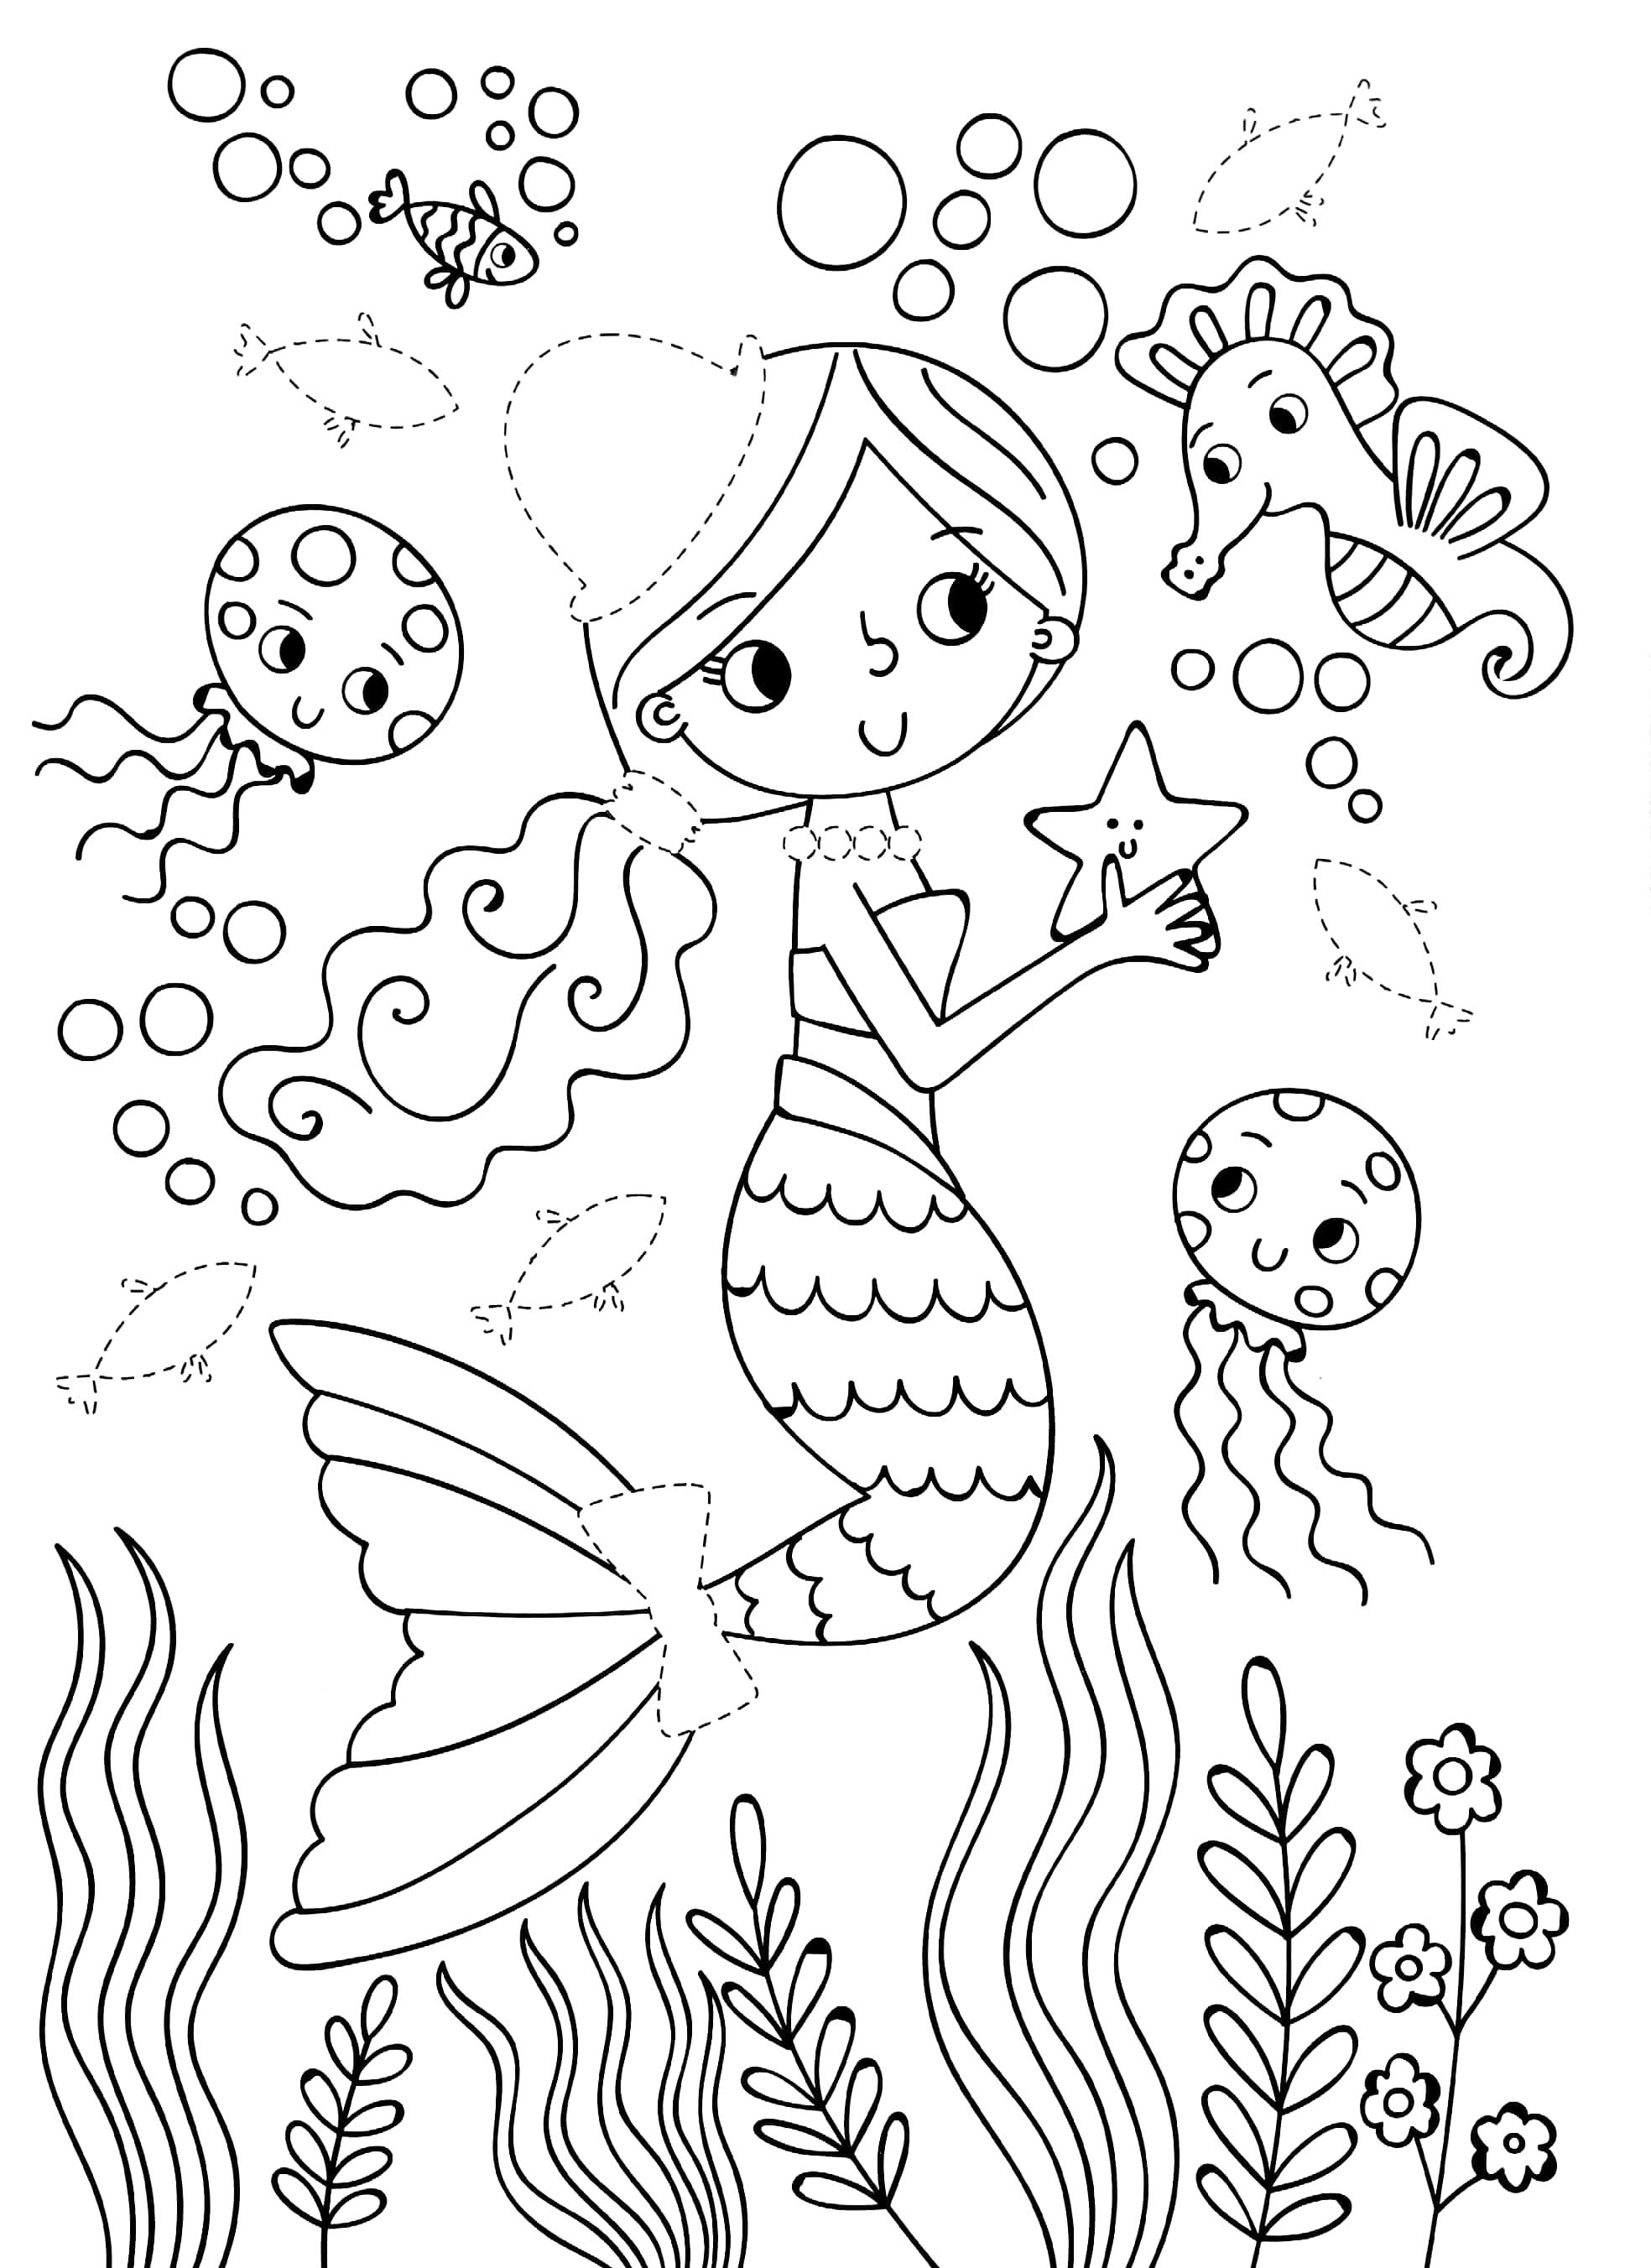 Dress Me Up Colouring And Activity Book - Mermaids